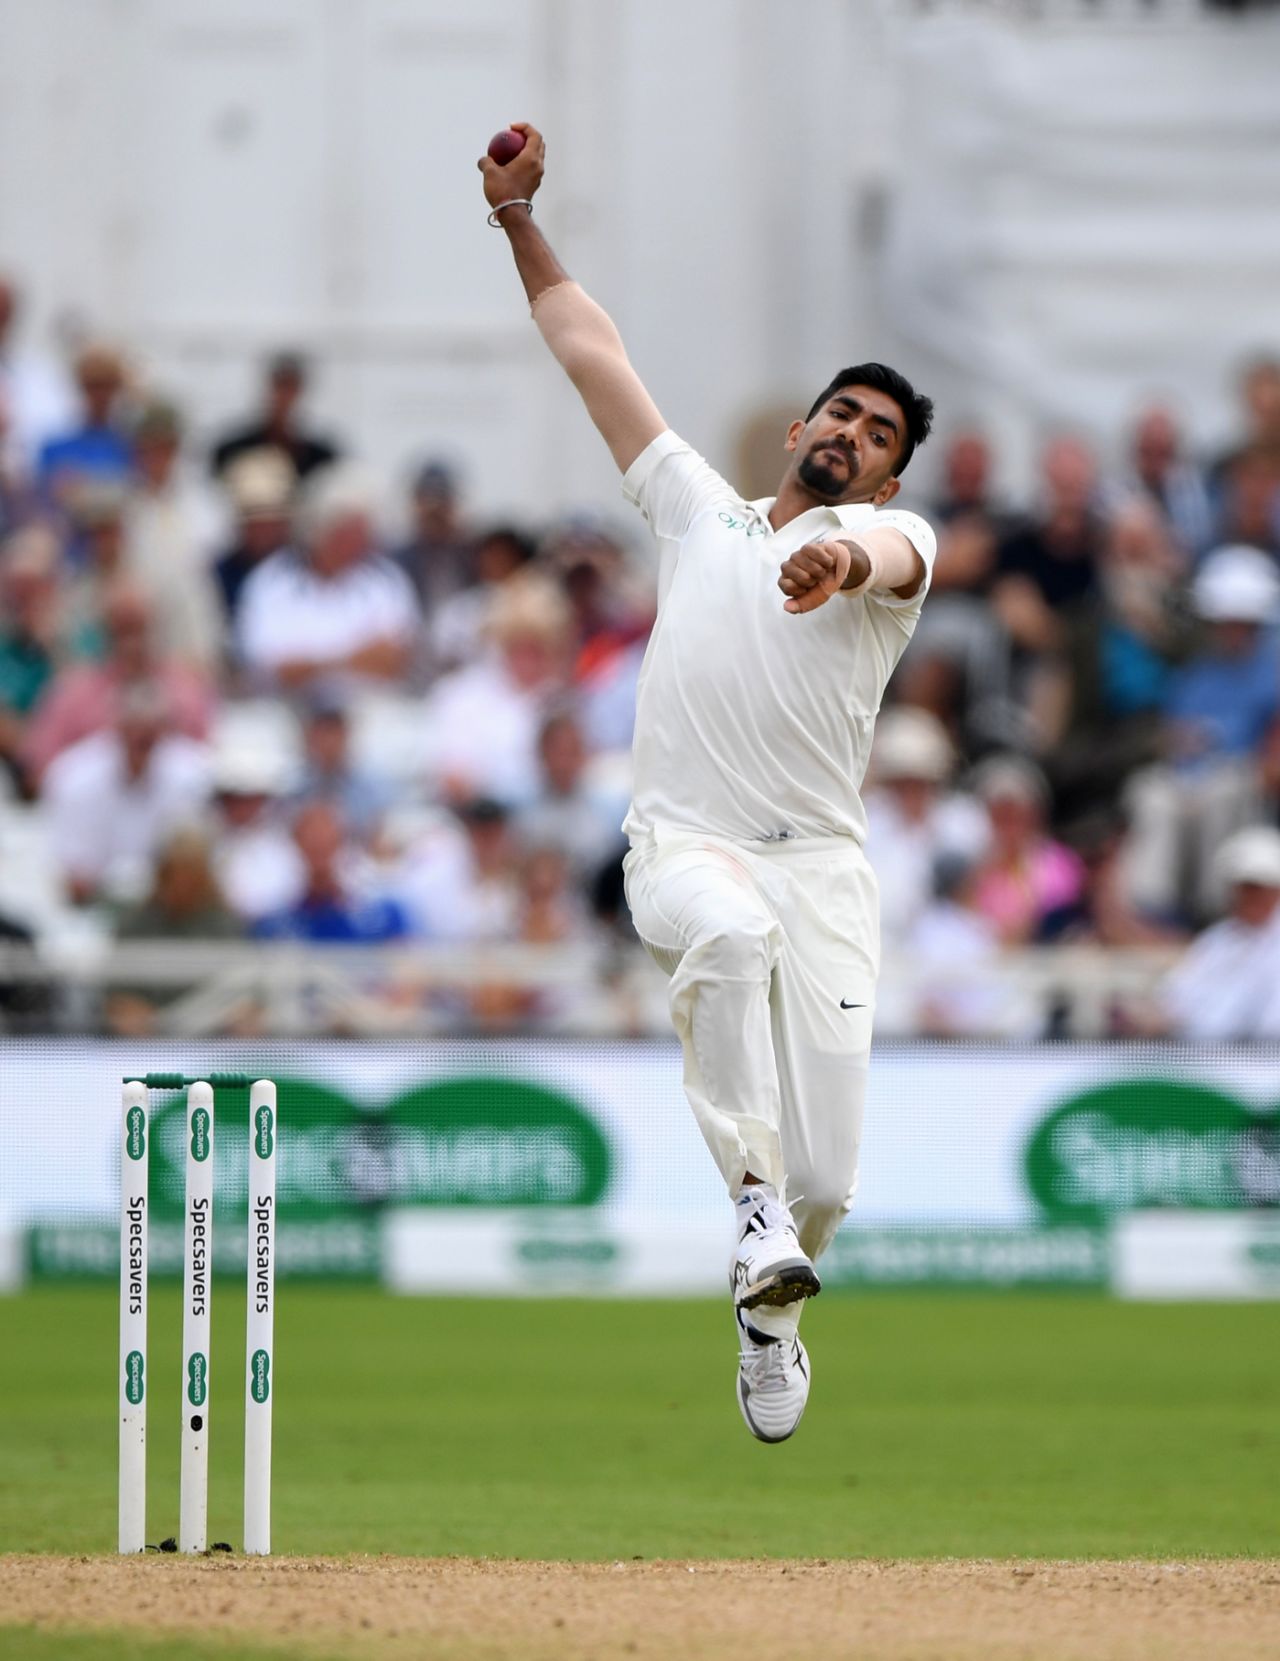 Jasprit Bumrah leaps into his delivery stride, England v India, 3rd Test, Trent Bridge, 4th day, August 21, 2018